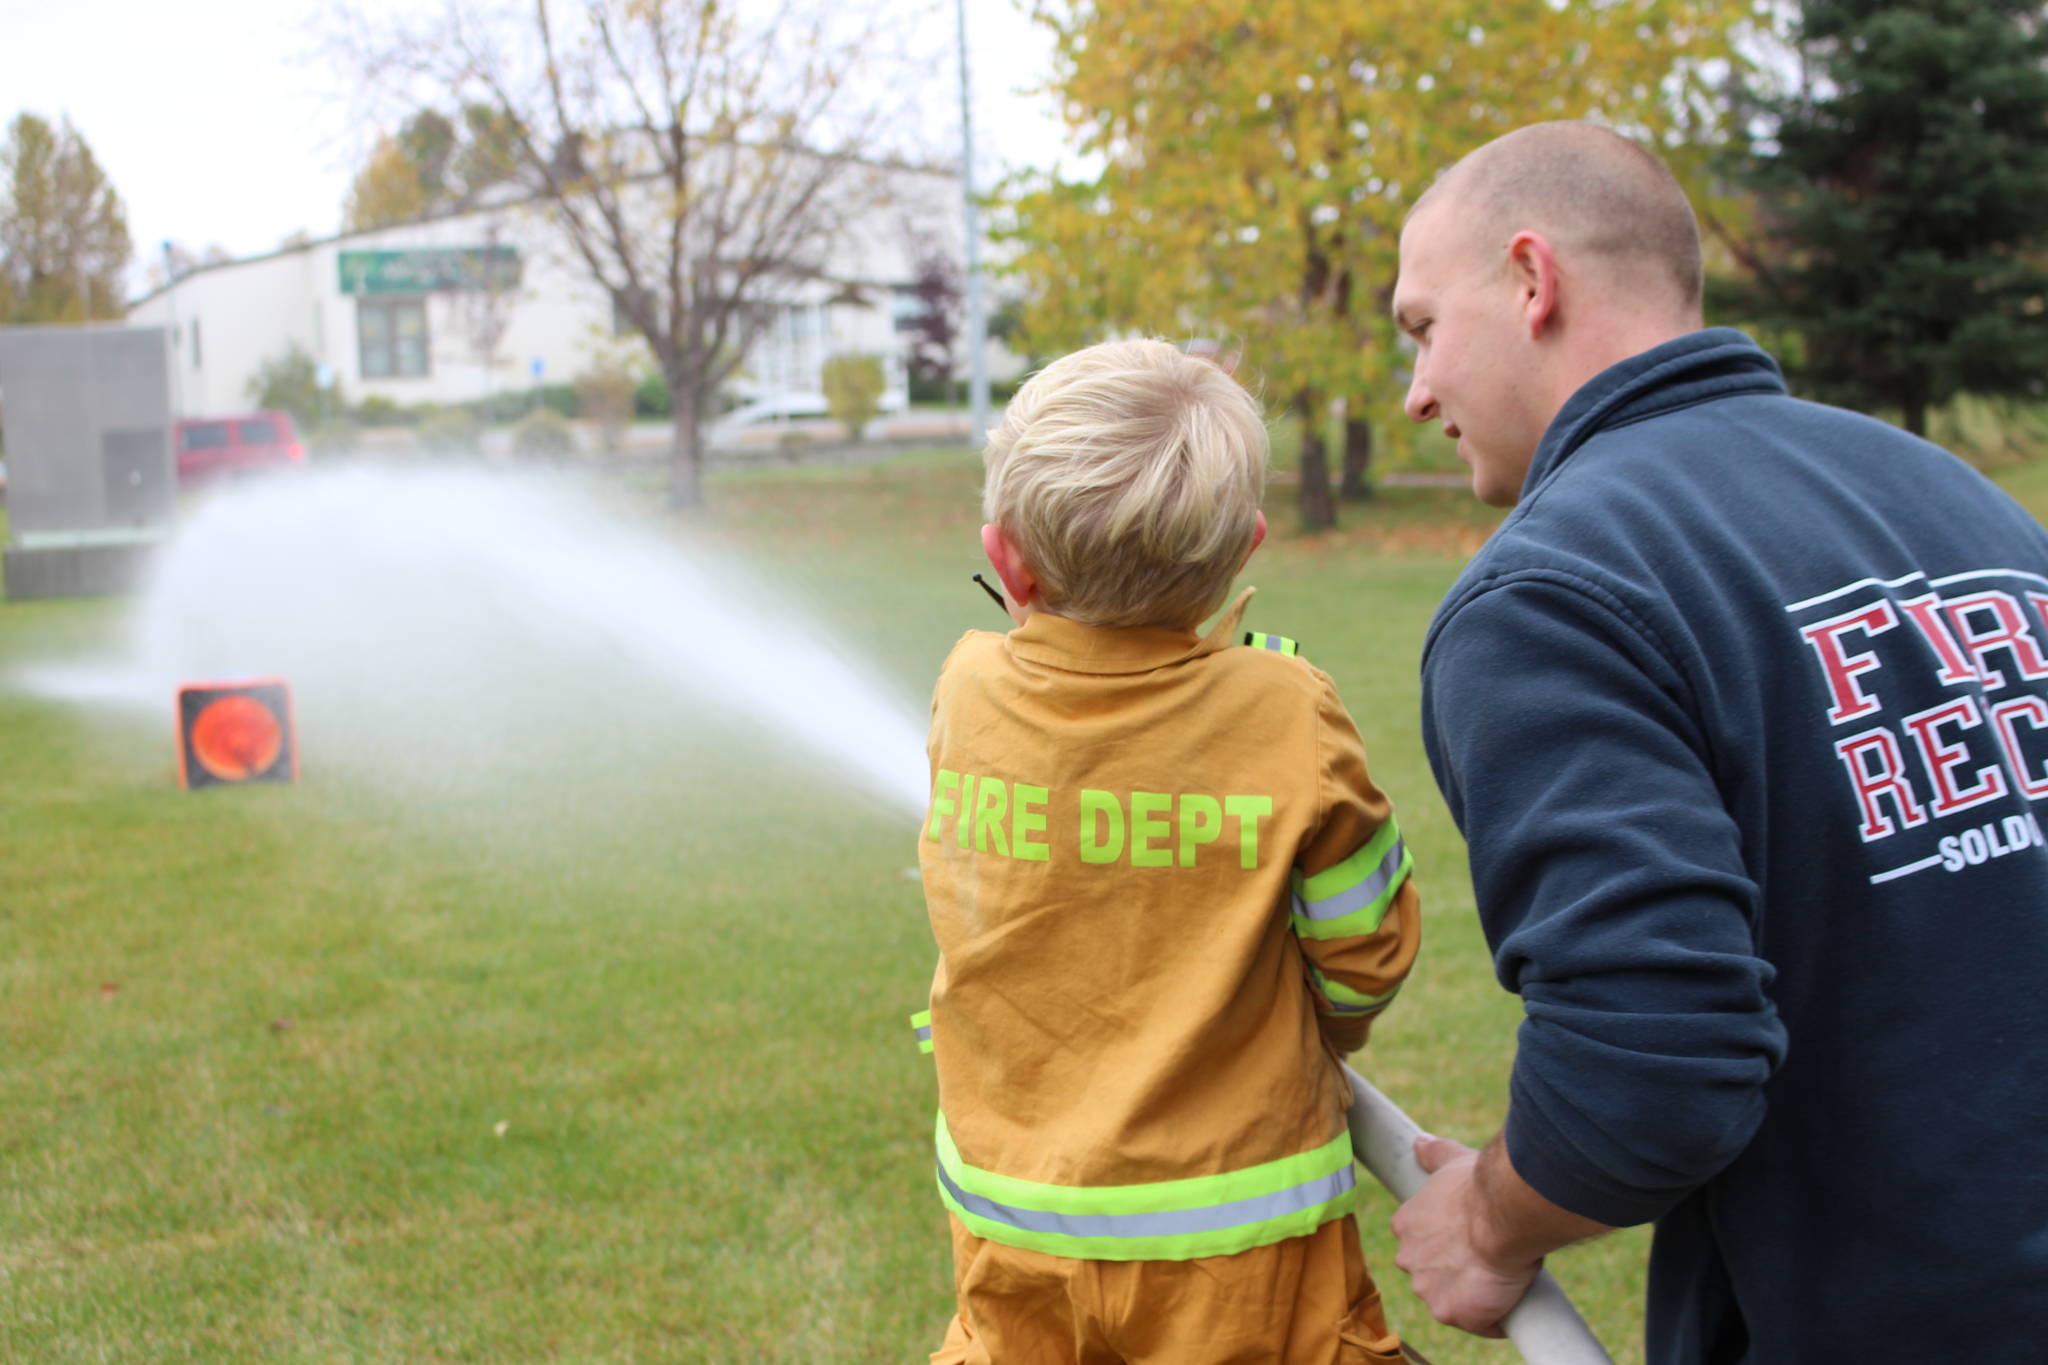 A young firefighter-in-training practices knocking down a water jug with a fire hose during the Central Emergency Services Open House at Fire Station 1 in Soldotna, Alaska on Sept. 28, 2019. (Photo by Brian Mazurek/Peninsula Clarion)